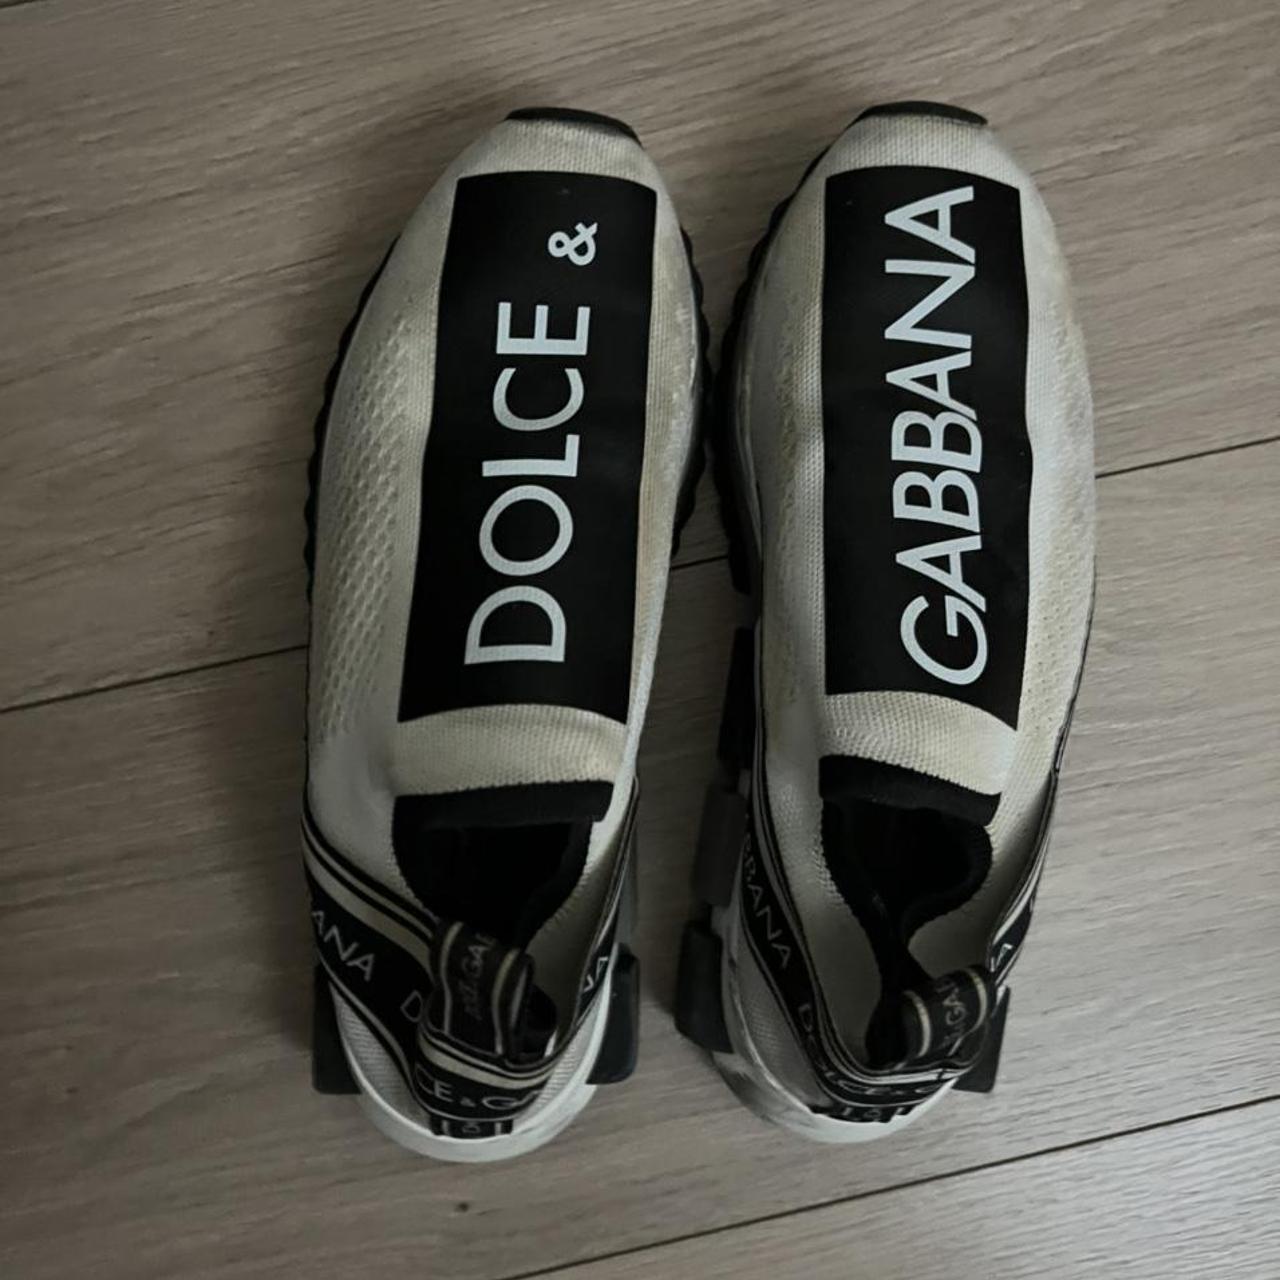 Dolce & Gabbana Women's Black and White Trainers (4)